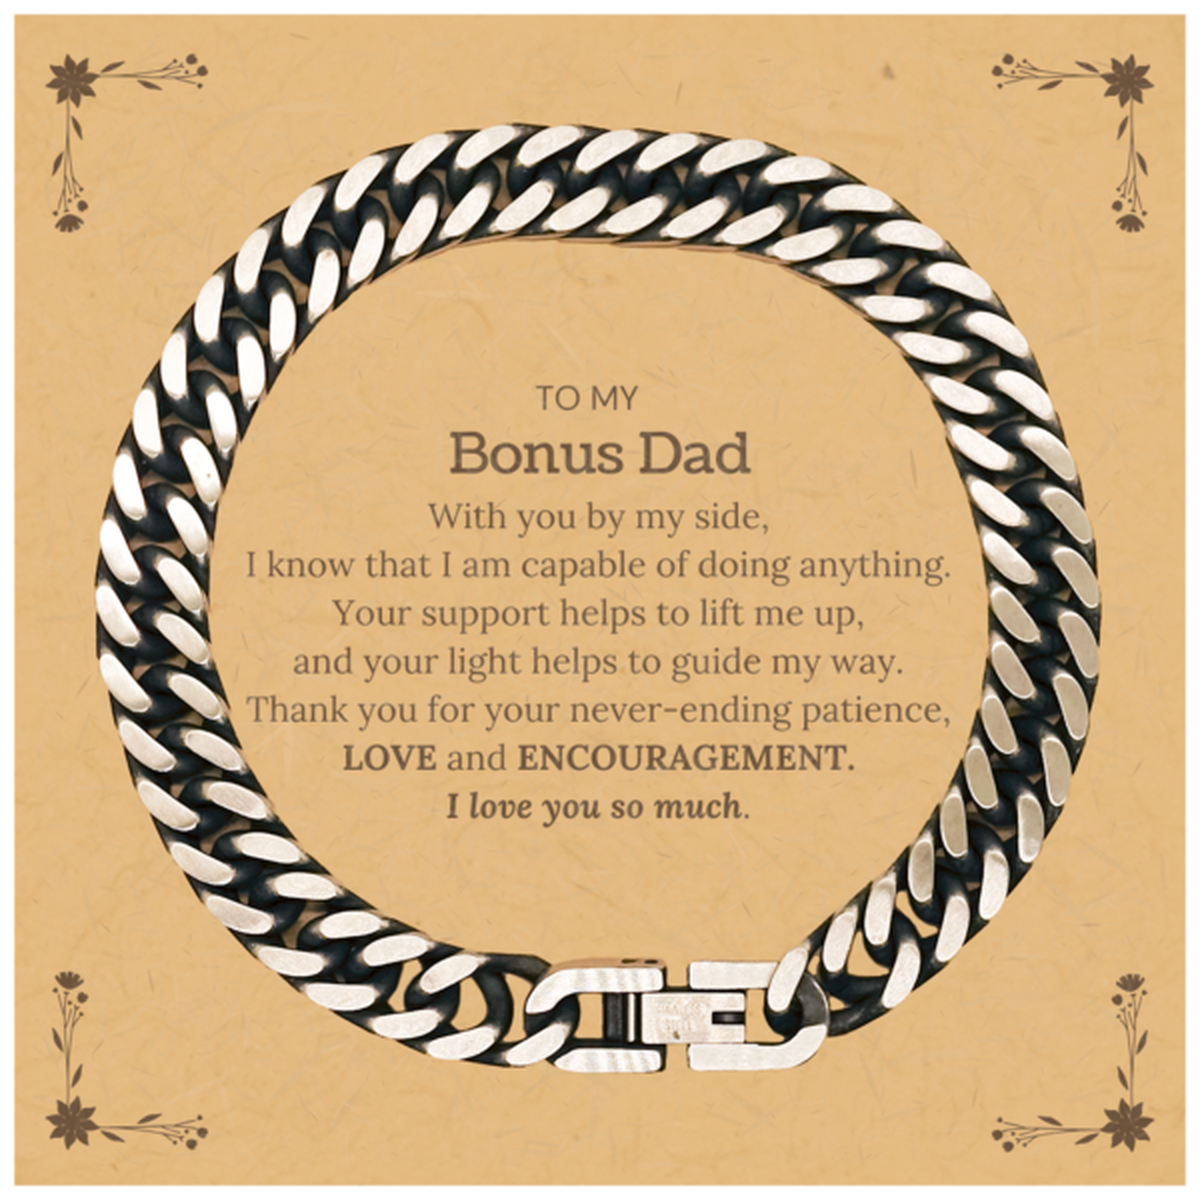 Appreciation Bonus Dad Cuban Link Chain Bracelet Gifts, To My Bonus Dad Birthday Christmas Wedding Keepsake Gifts for Bonus Dad With you by my side, I know that I am capable of doing anything. I love you so much